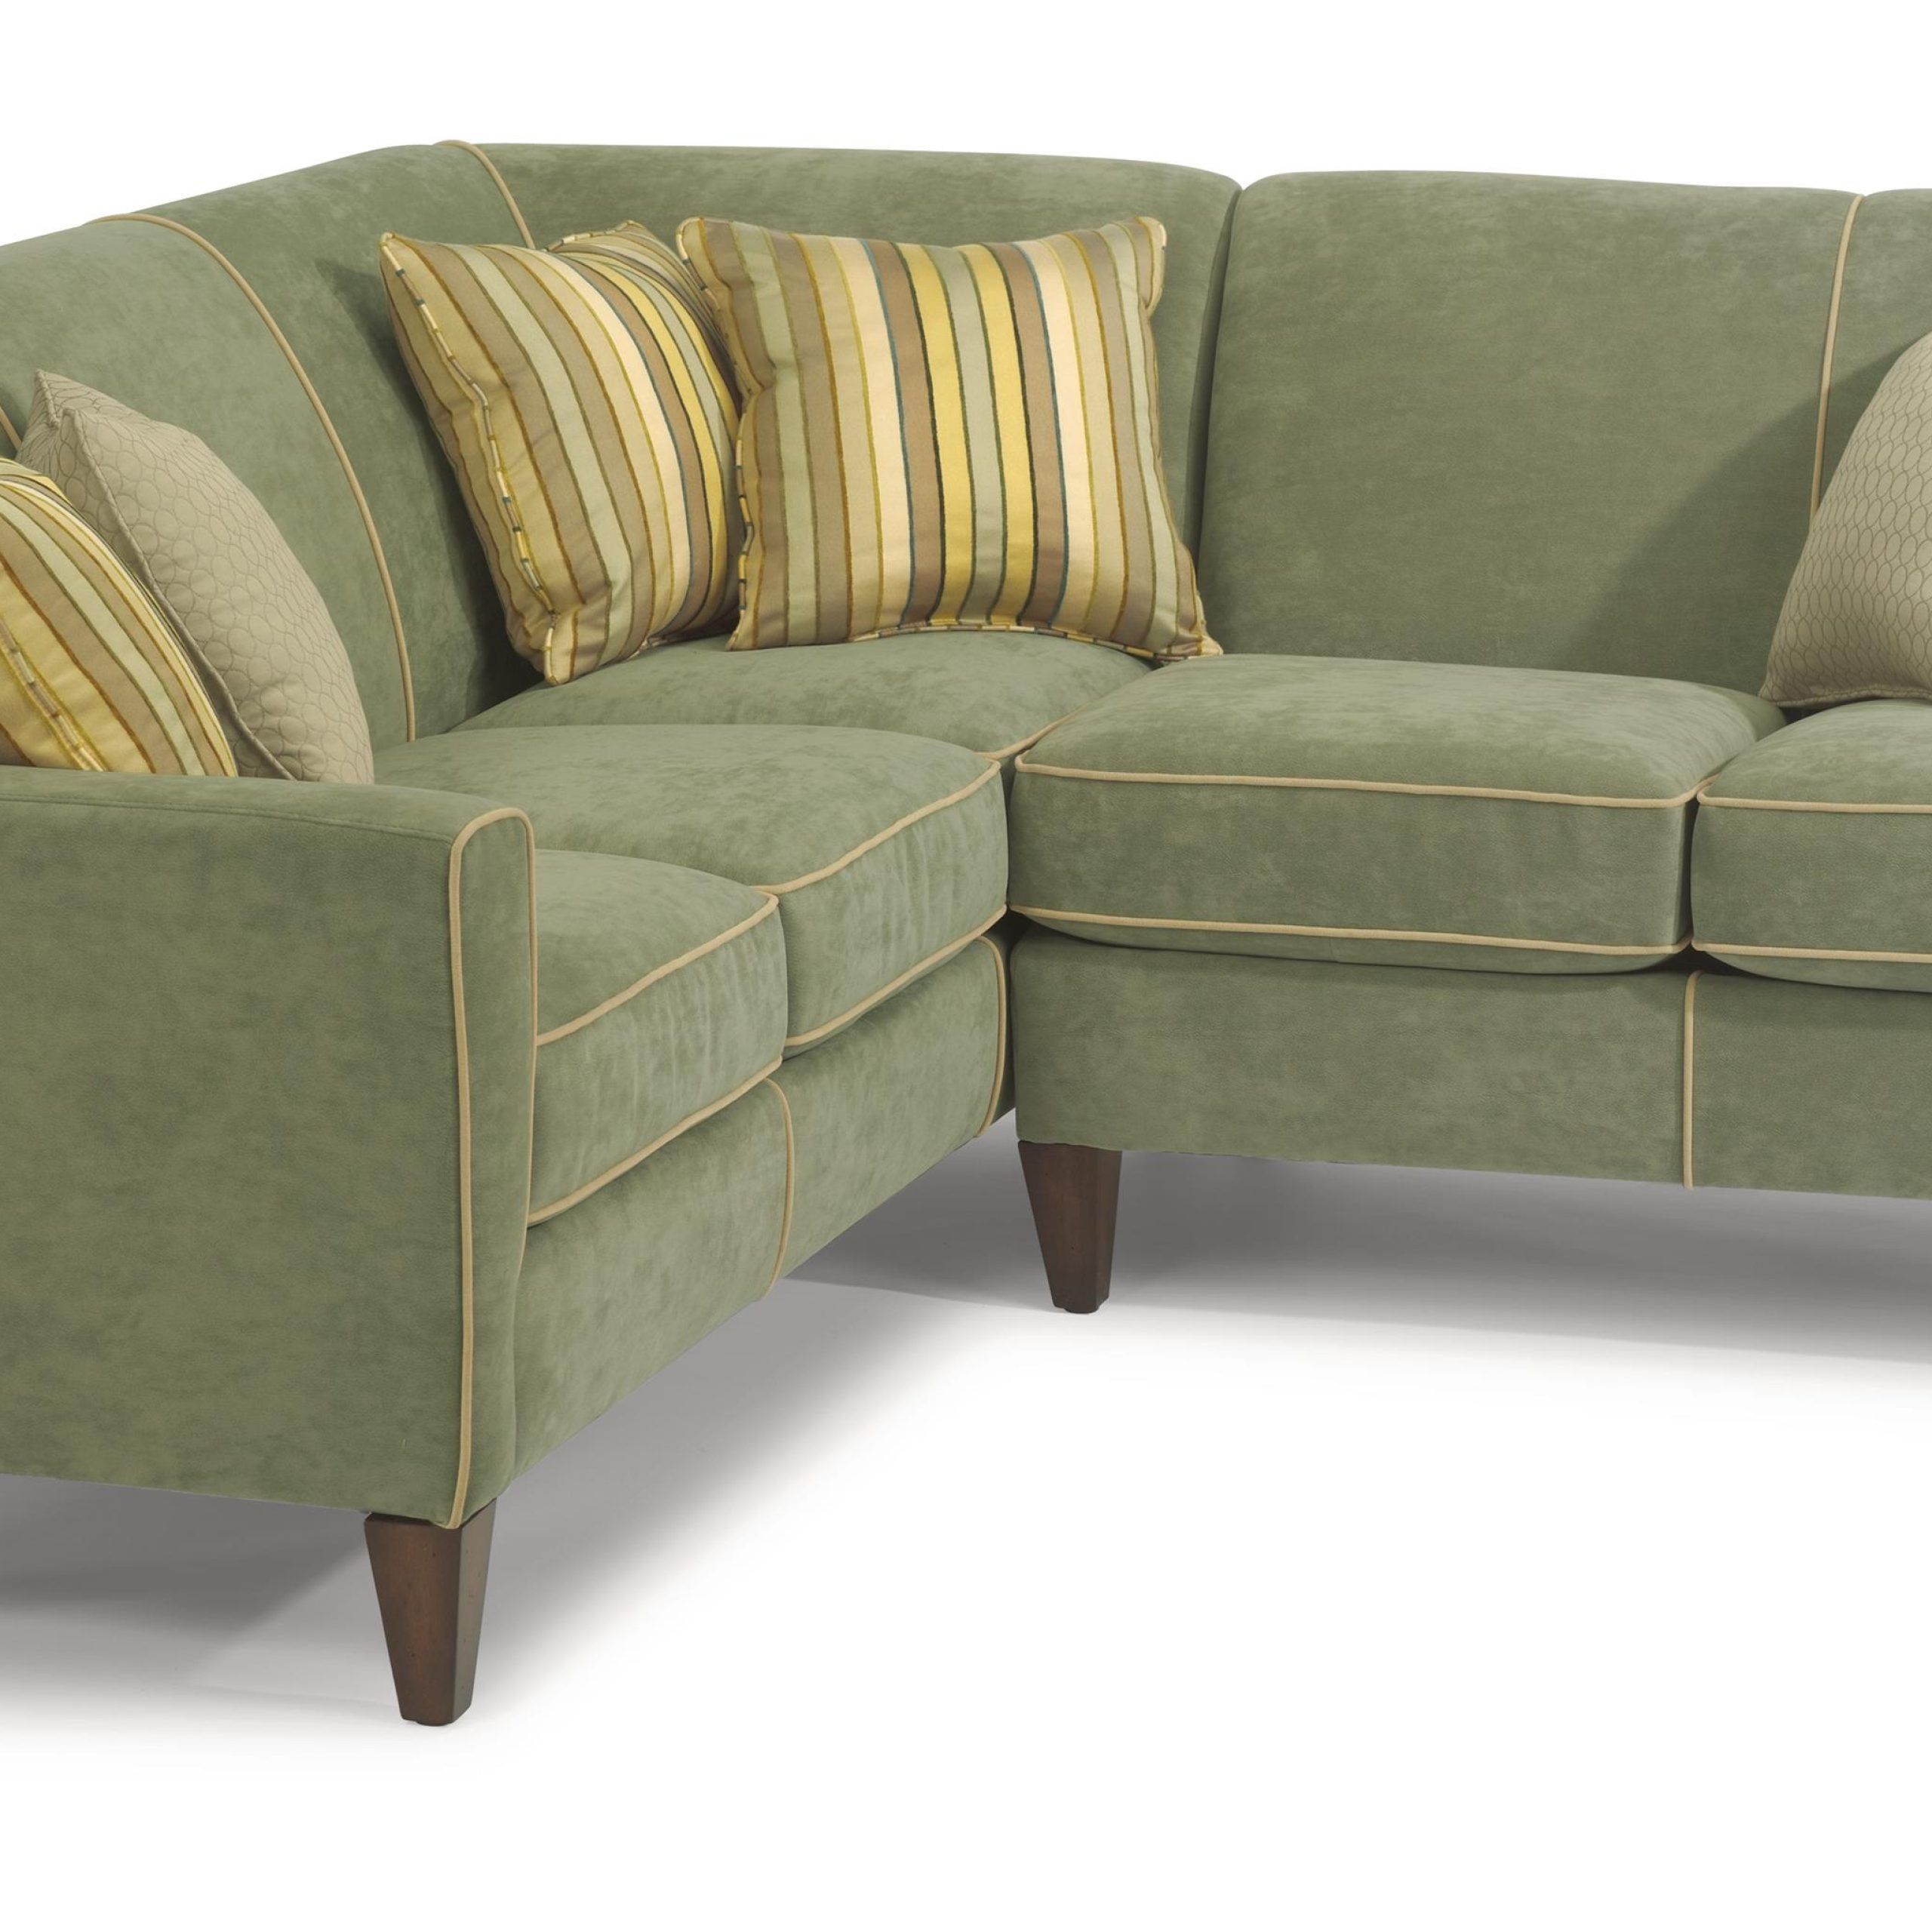 Flexsteel Digby 3966 28x1+3966 33x1 430 24 Contemporary L Shape With Regard To Modern L Shaped Sofa Sectionals (View 5 of 20)